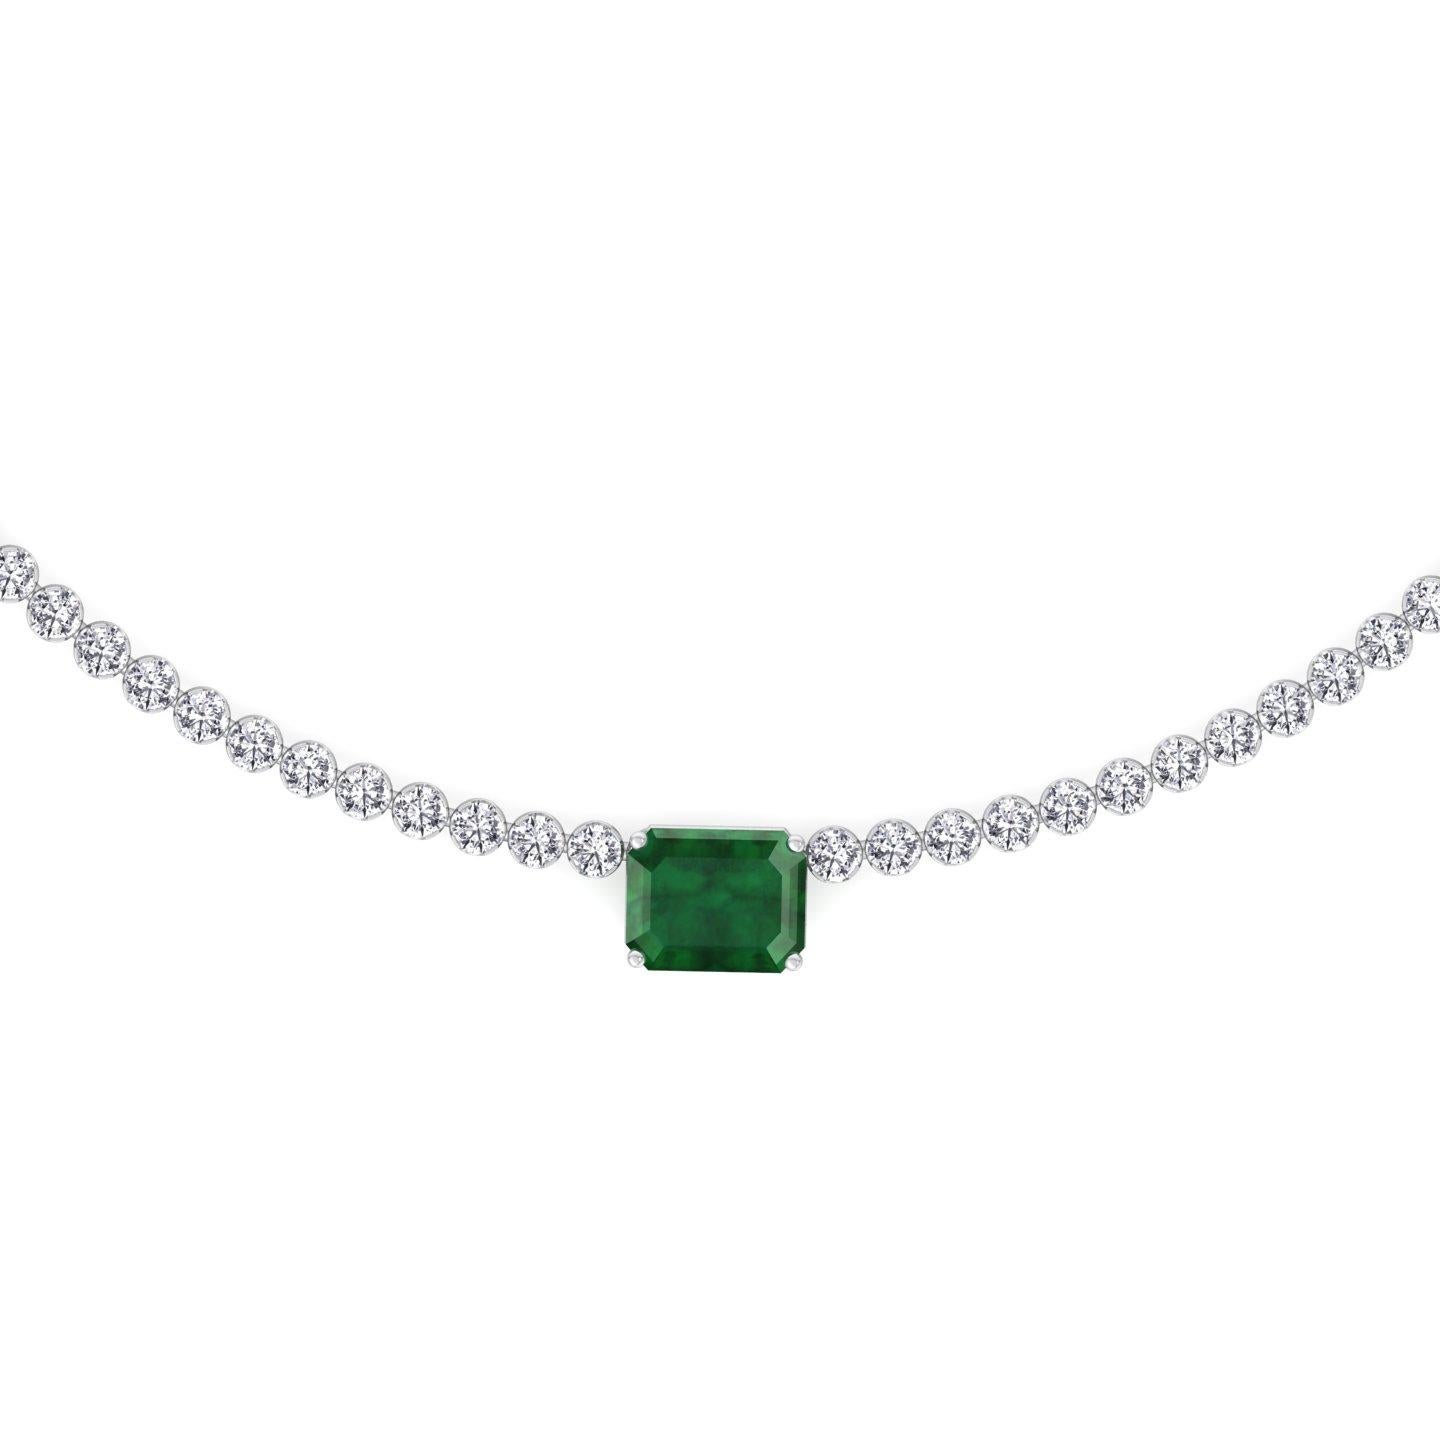 Our Emerald and Diamond Tennis Necklace is an amazing piece. This tennis necklace features a beautiful emerald center stone and to complement the center stone are the dazzling diamonds set in a prong-setting tennis necklace with a total carat weight